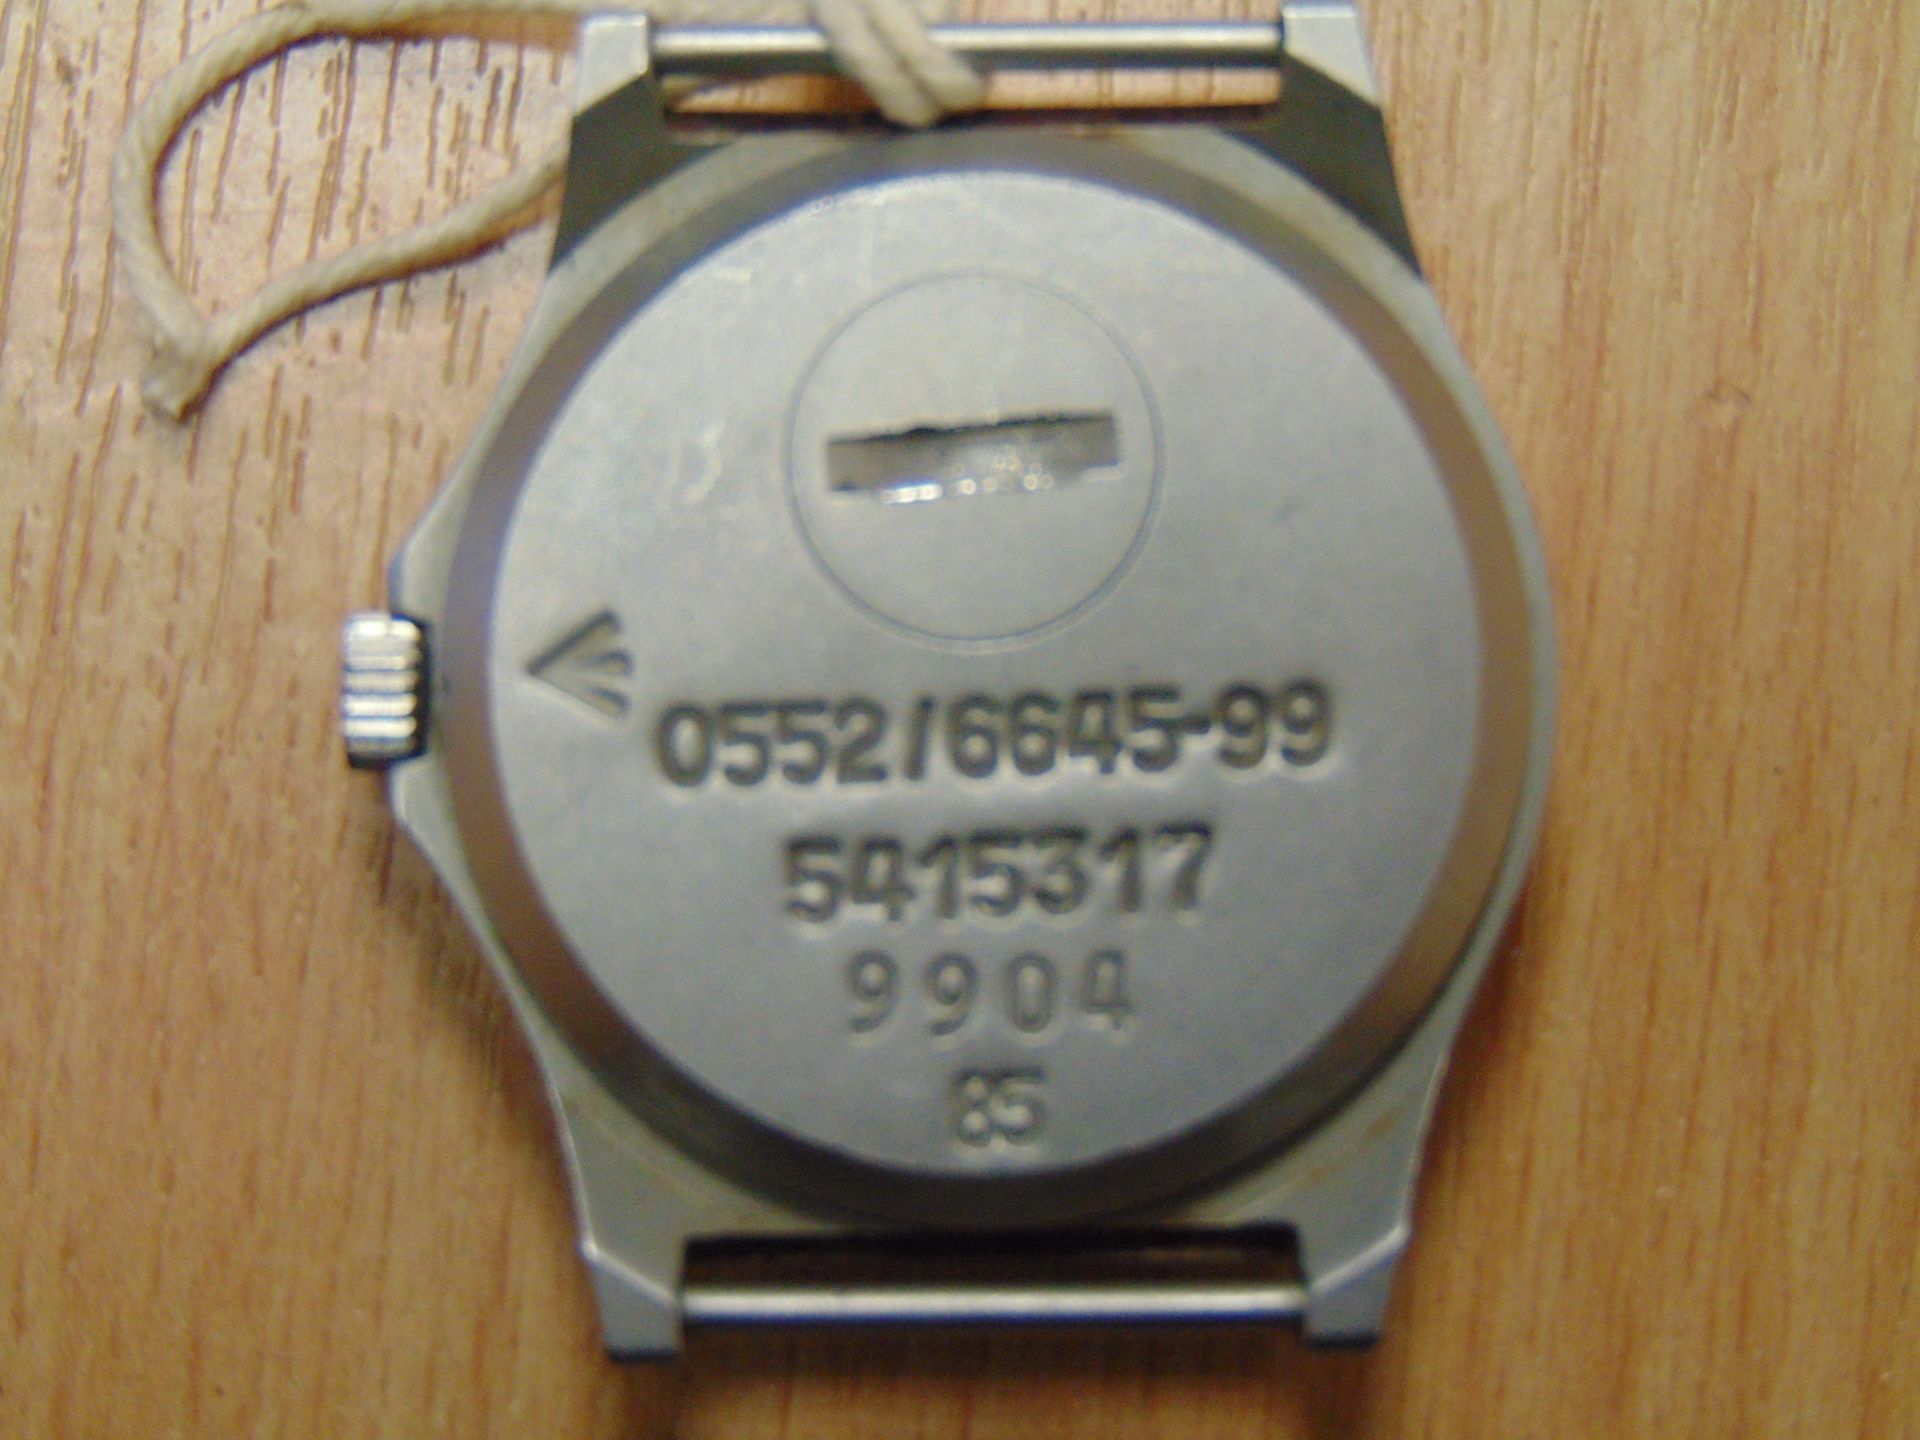 RARE CWC FAT BOY 0552 RM/ NAVY ISSUE SERVICE WATCH DATE 1985 - Image 4 of 4